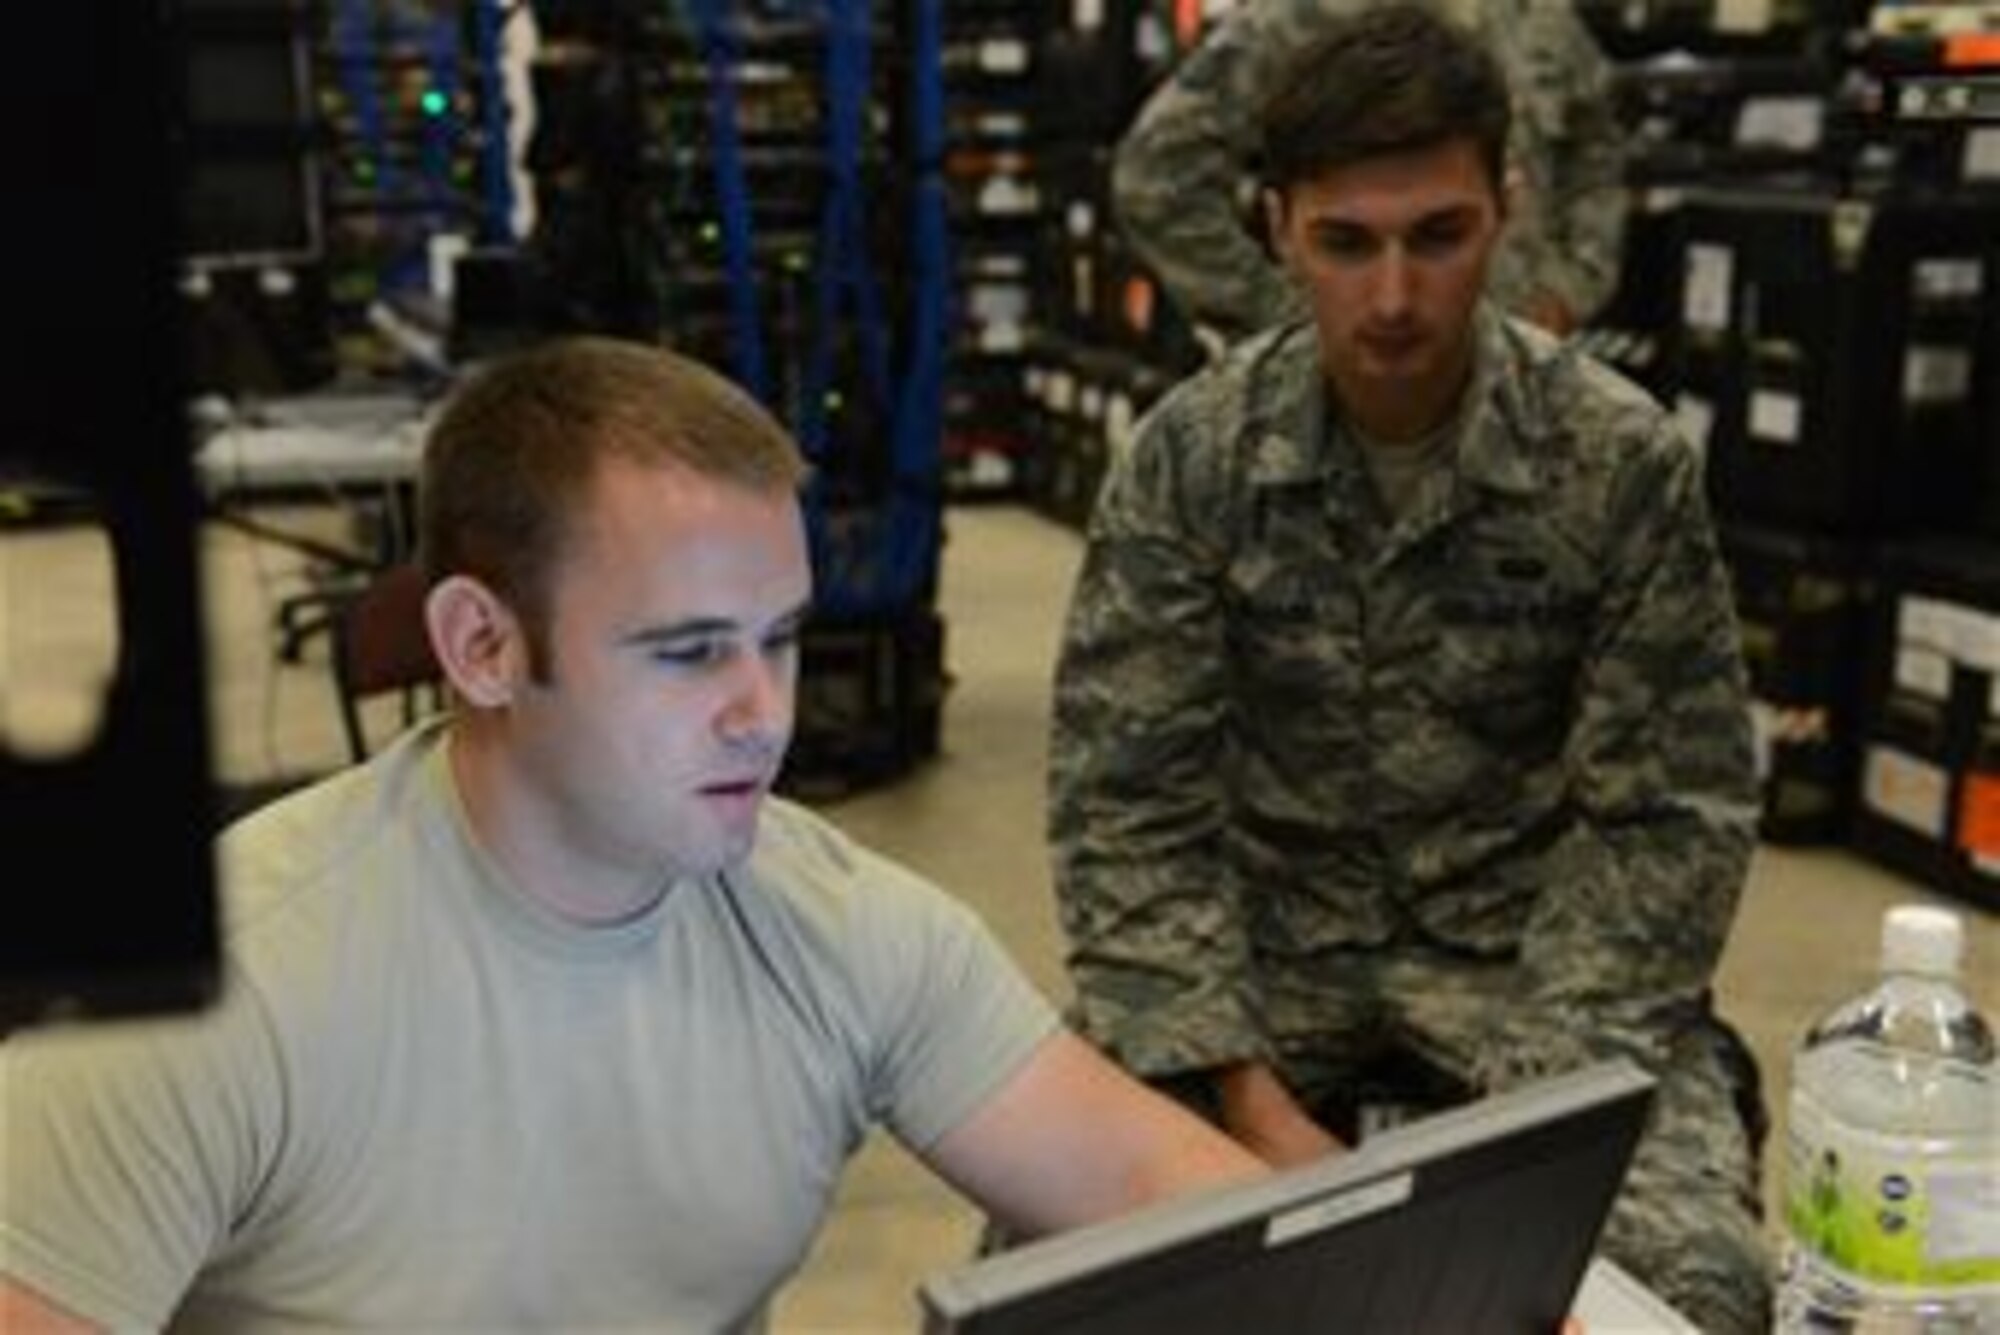 (From left) Staff Sgt. Richard Rawls, cyber systems supervisor, and Senior Airman Garett Savard, cyber systems operator, both from the 644th Combat Communications Squadron, update programs on one of the three transportable base servers Jan. 13, 2014, on Andersen Air Force Base, Guam. The 644th CBCS became aligned with the 36th Contingency Response Group to be able to support missions with smaller airlift requirements and faster reaction capabilities. (U.S. Air Force photo by Airman 1st Class Emily A. Bradley/Released)